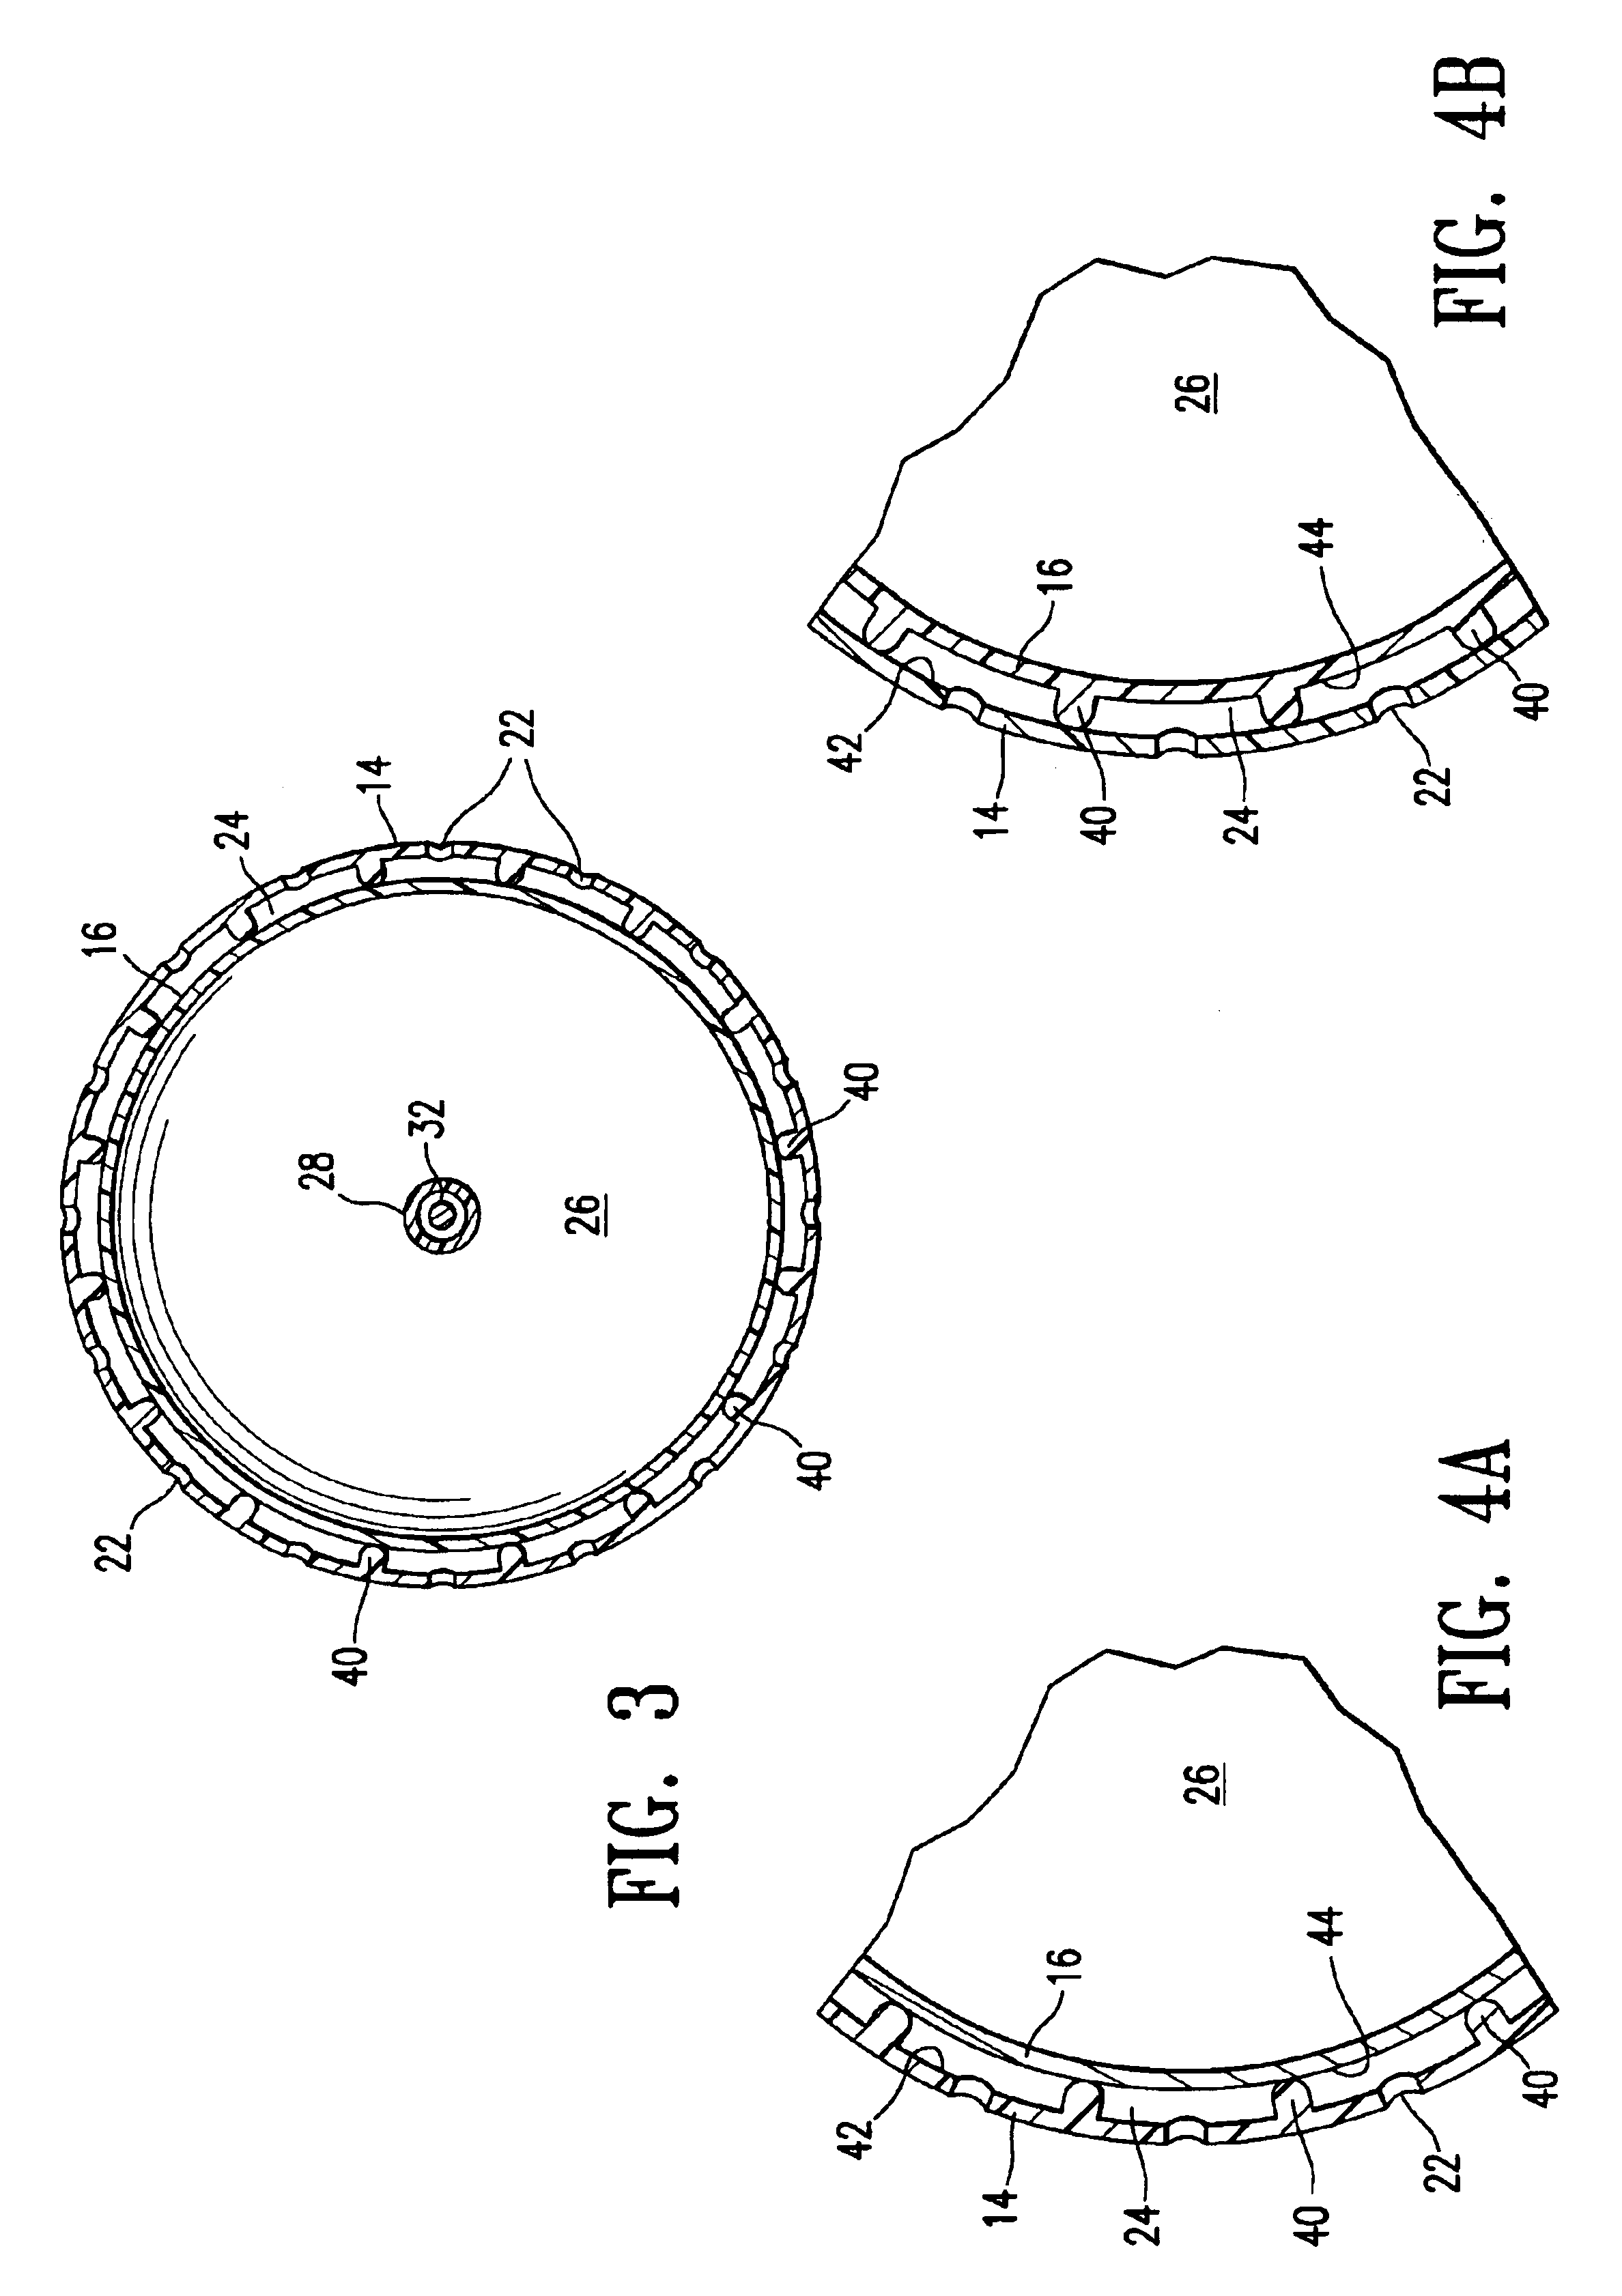 Vacuum device and method for treating tissue adjacent a body cavity